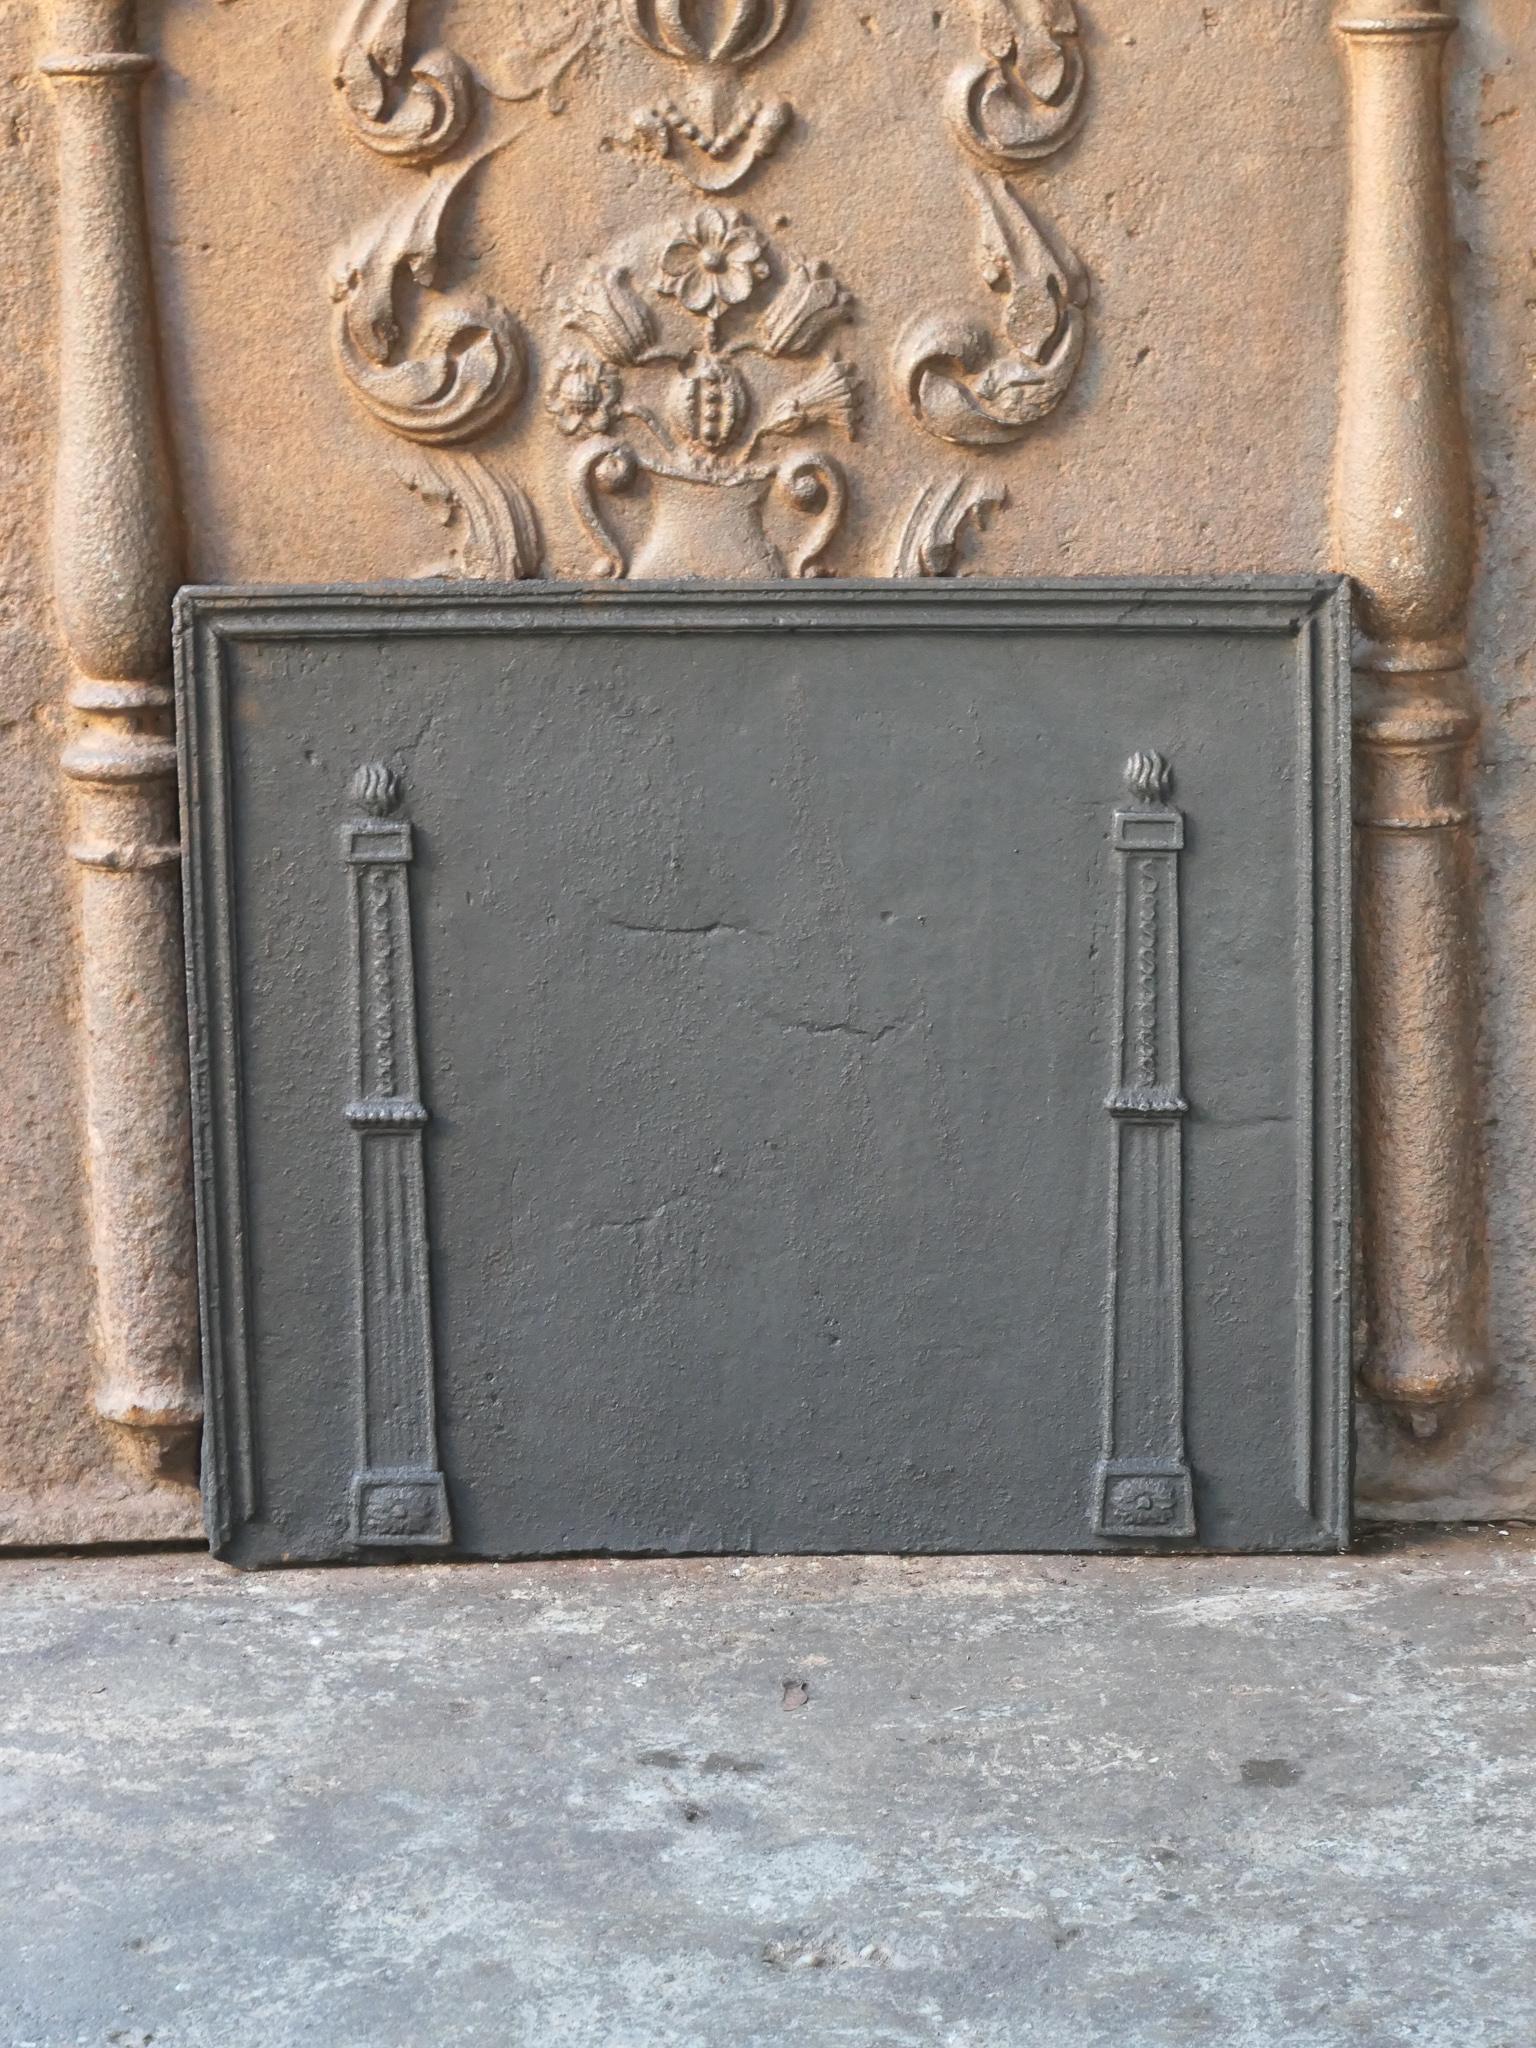 18th - 19th Century French neoclassical fireback with two pillars of freedom. The pillars symbolize the value liberty, one of the three values of the French revolution. 

The fireback is made of cast iron and has a black / pewter patina. It is in